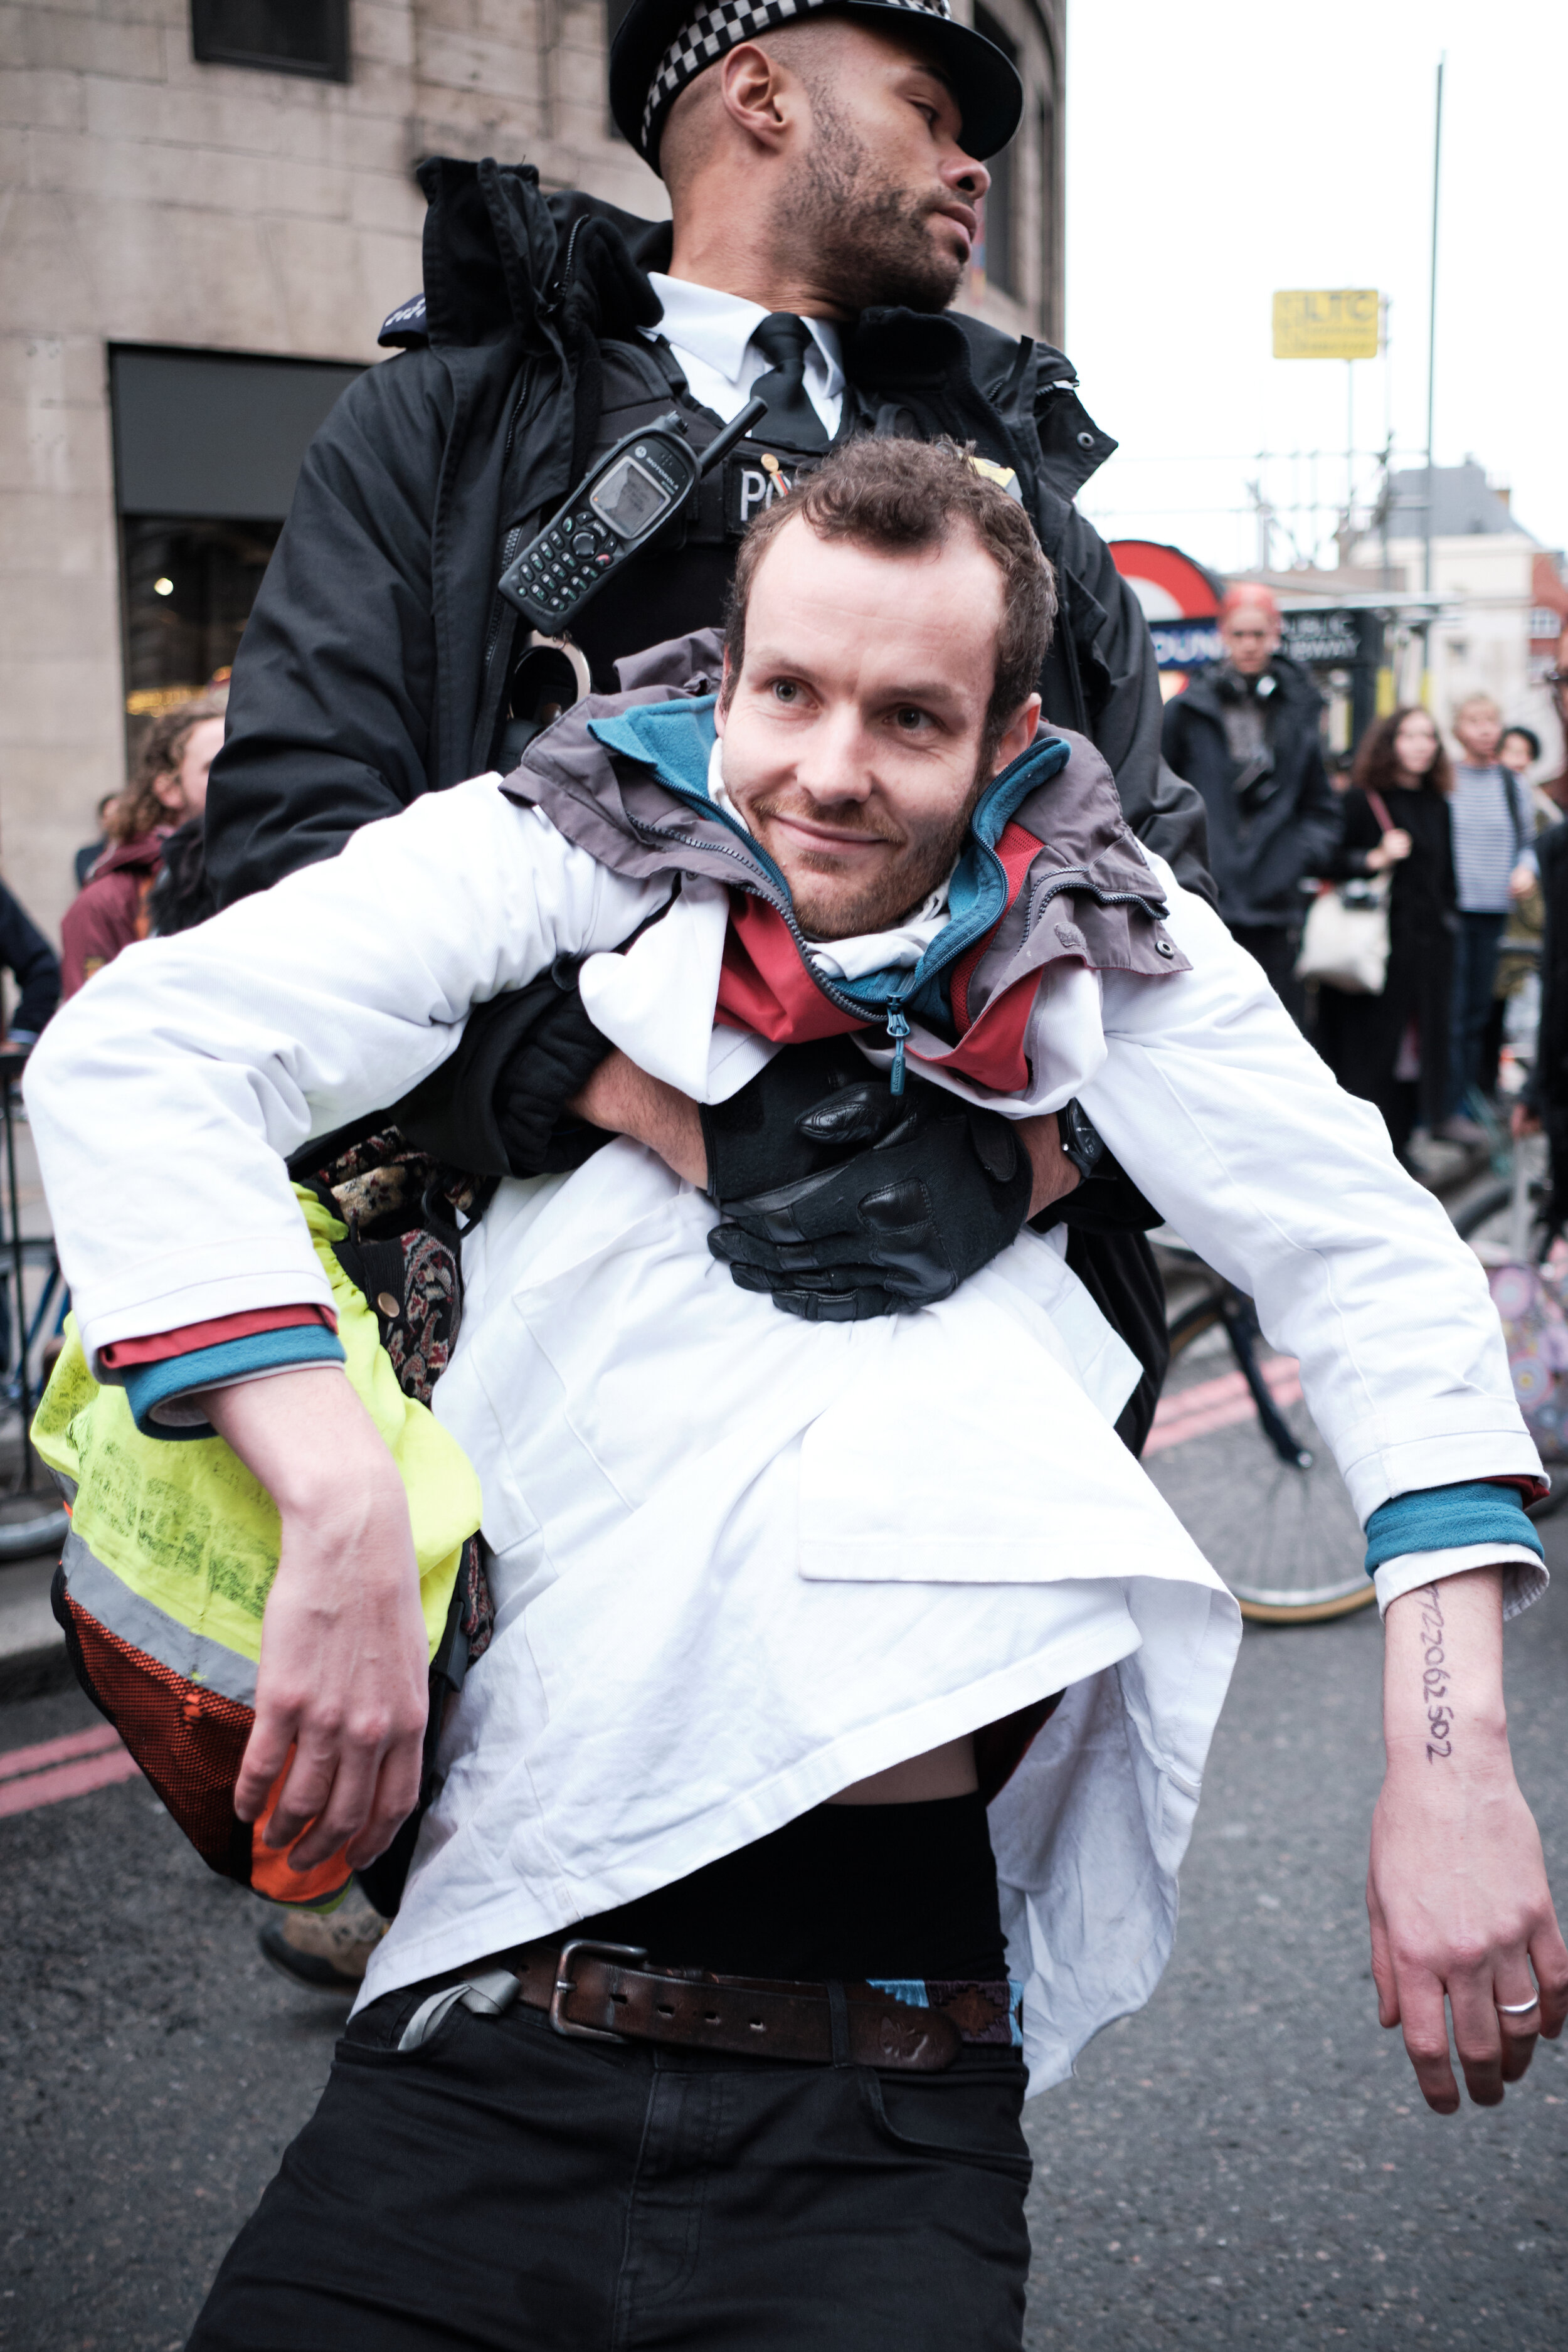  Scientists for Extinction Rebellion joined the City of London protests by closing the entrance road to London Bridge. They were quickly removed by police, but subsequently de-arrested because of the negative backlash arresting respected scientific p